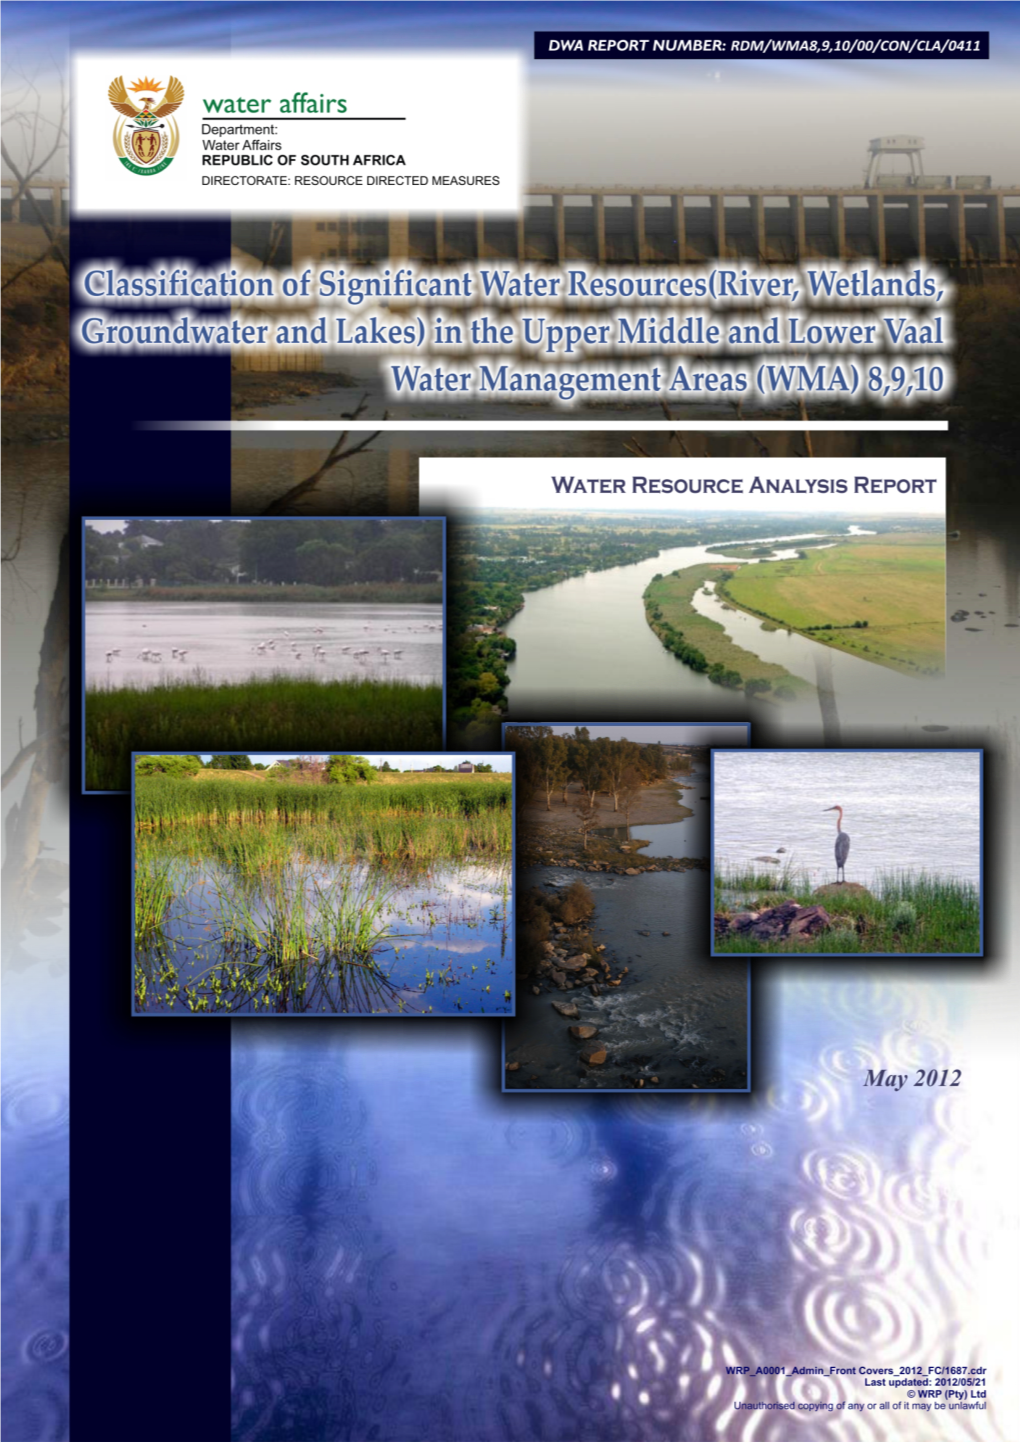 In the Upper, Middle and Lower Vaal Water Management Areas (WMA) 8,9,10 WATER RESOURCE ANALYSIS REPORT